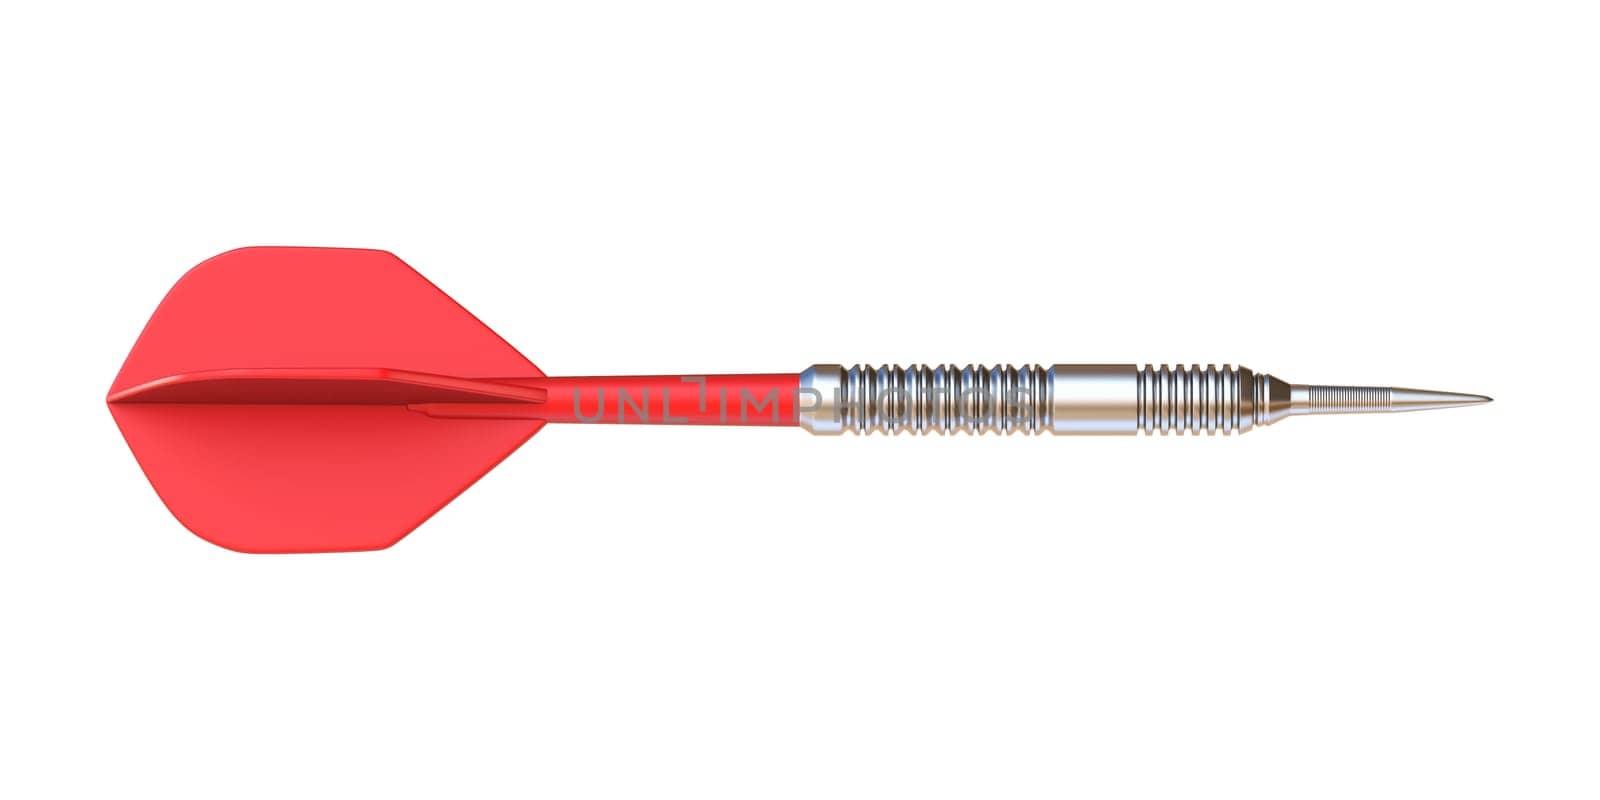 Single red dart 3D rendering illustration isolated on white background